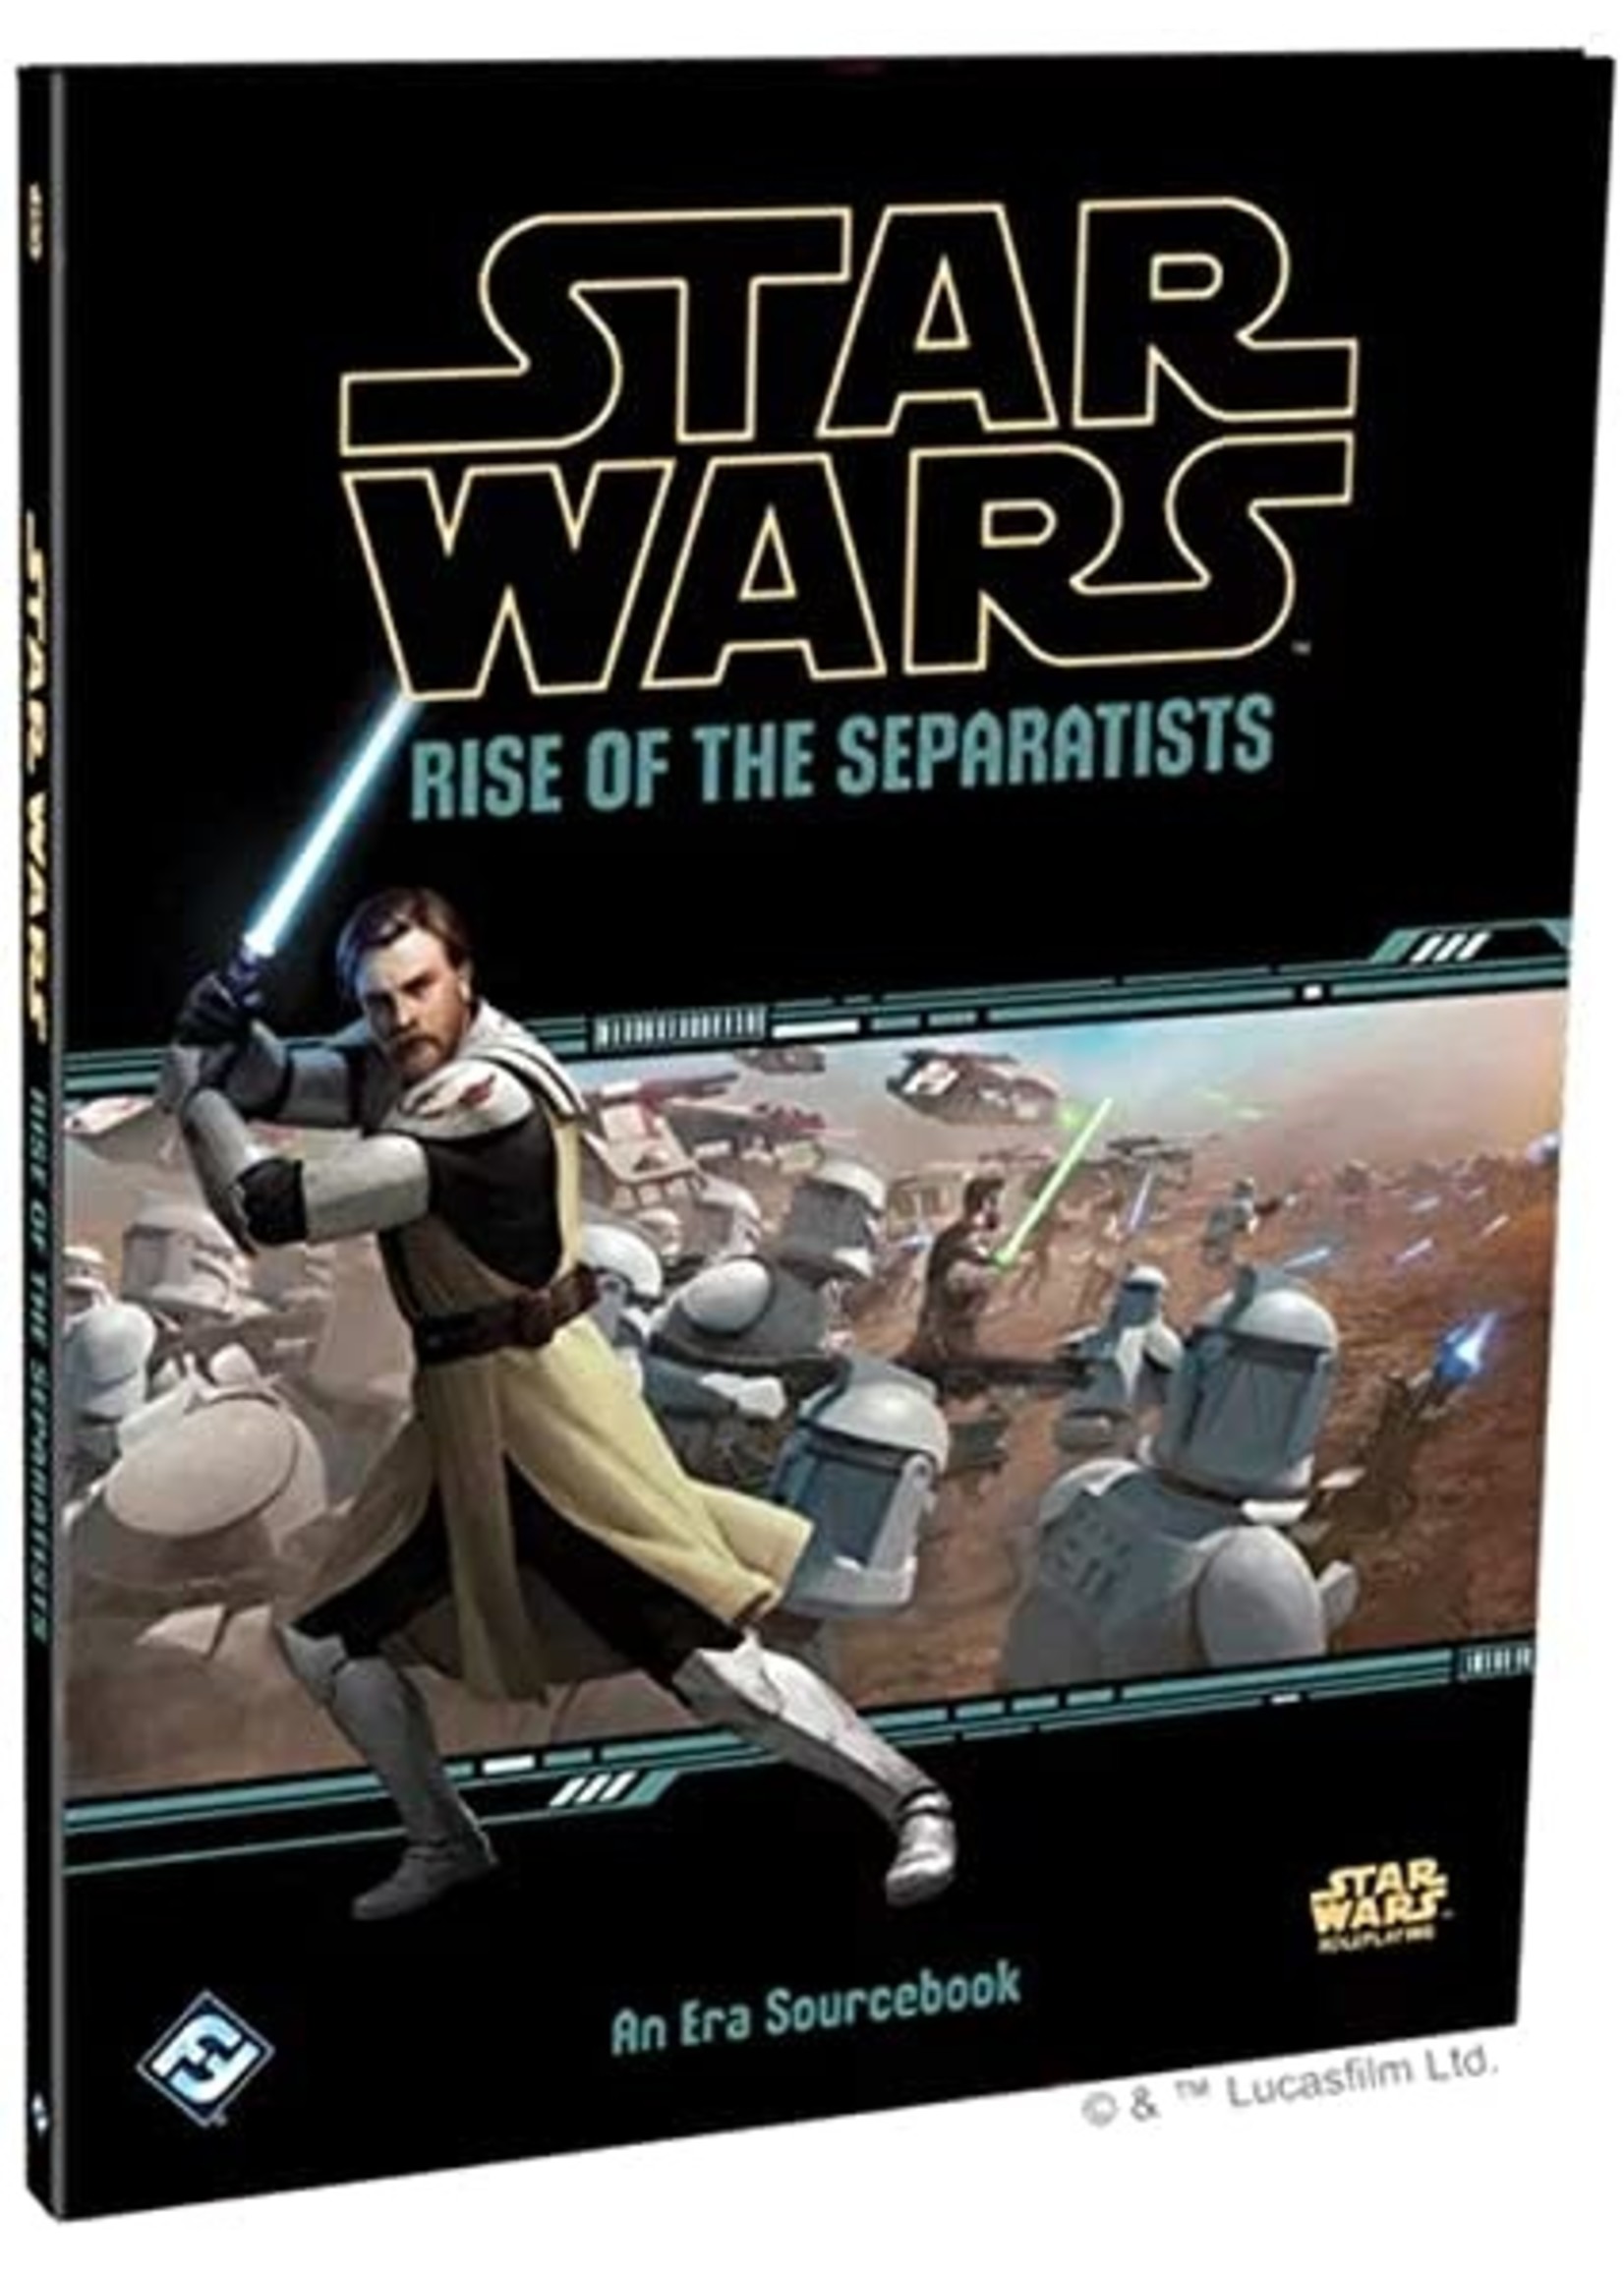 Fantasy Flight Games Star Wars: Rise of the Separatists Source book